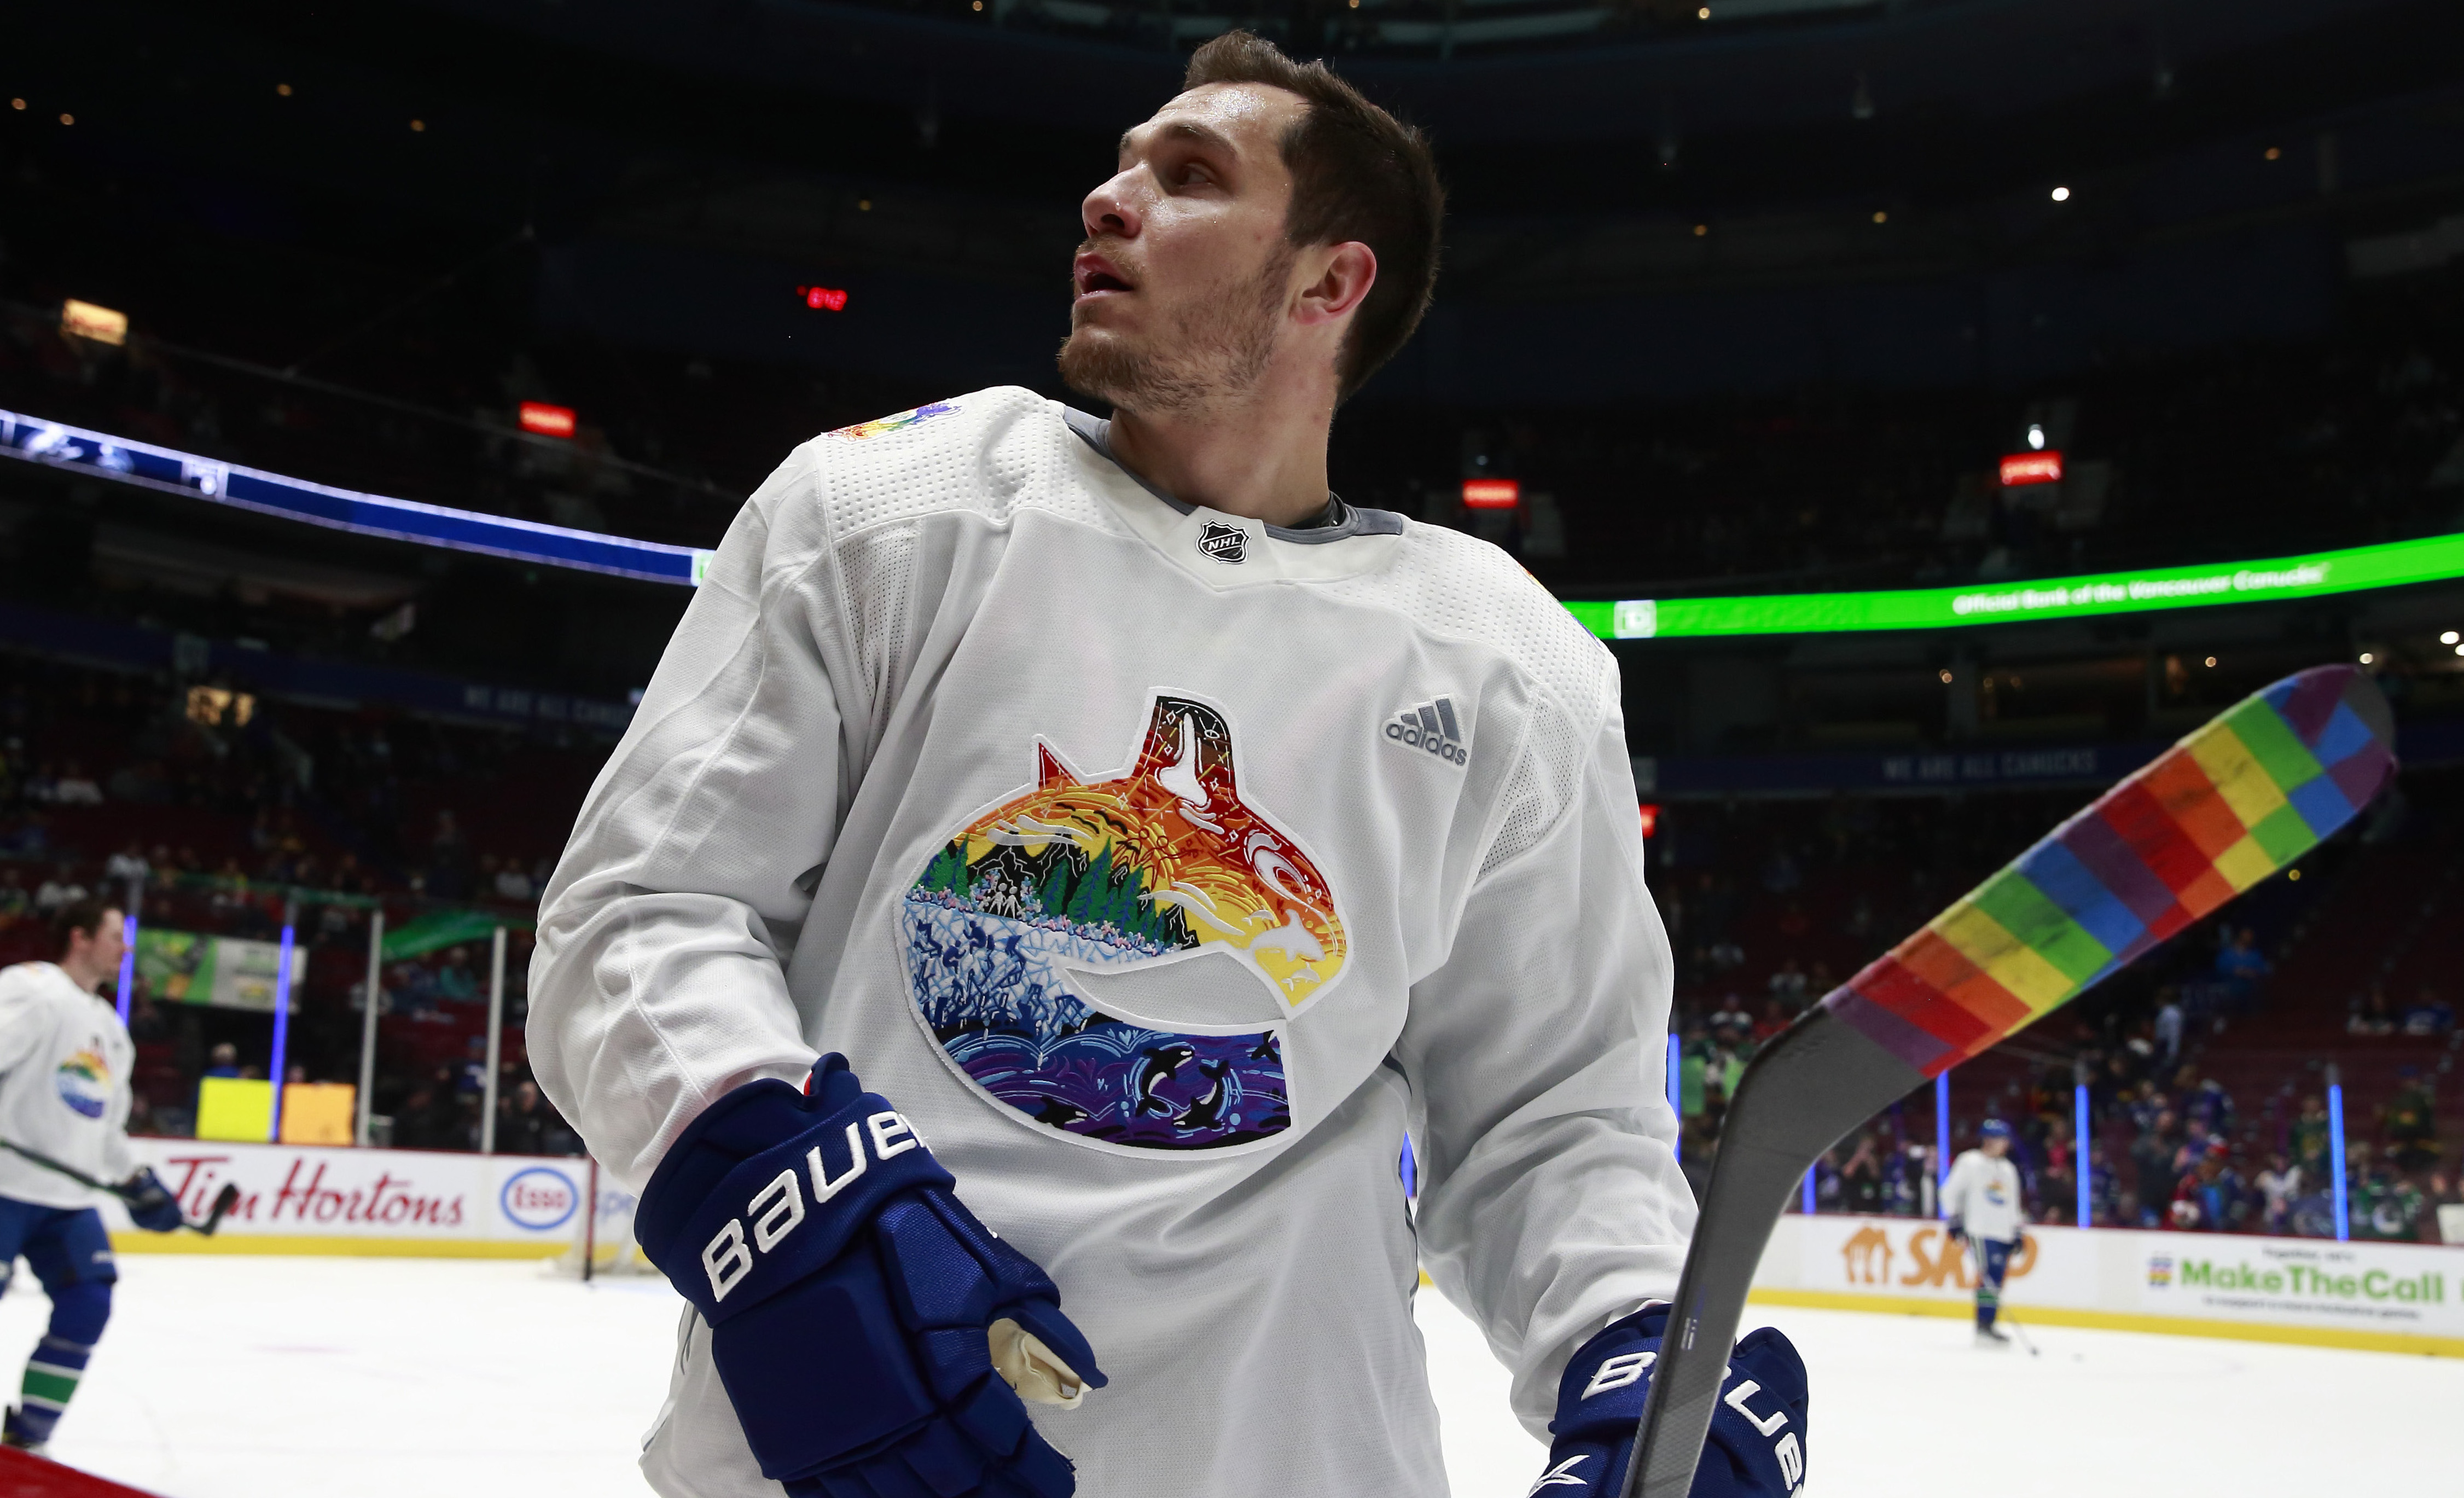 Players react to NHL's Pride Night changes: 'It's unfortunate